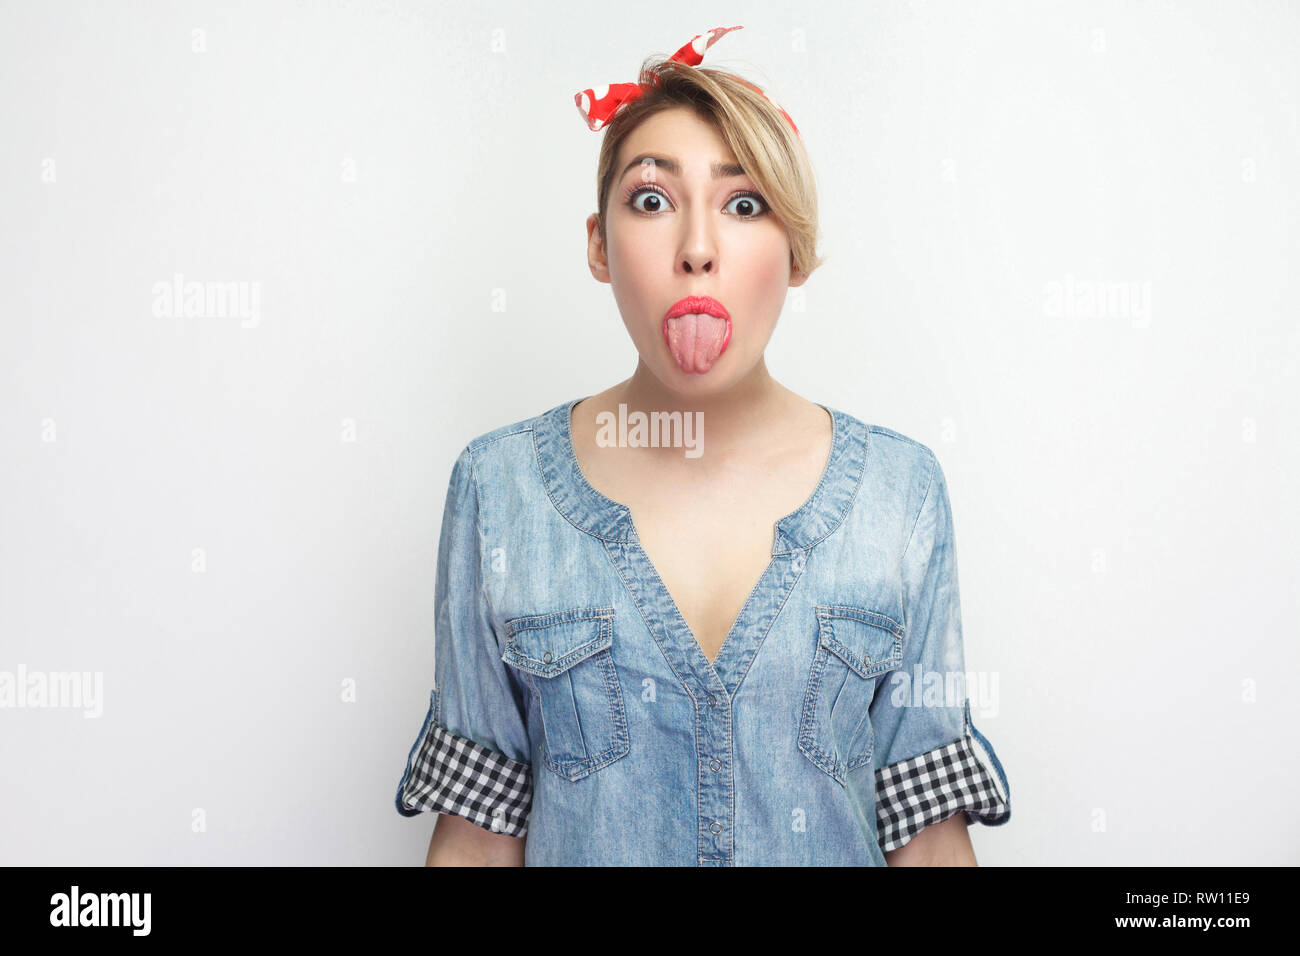 Portrait of funny beautiful young woman in casual blue denim shirt with makeup and red headband standing and looking at camera with tongue out and big Stock Photo